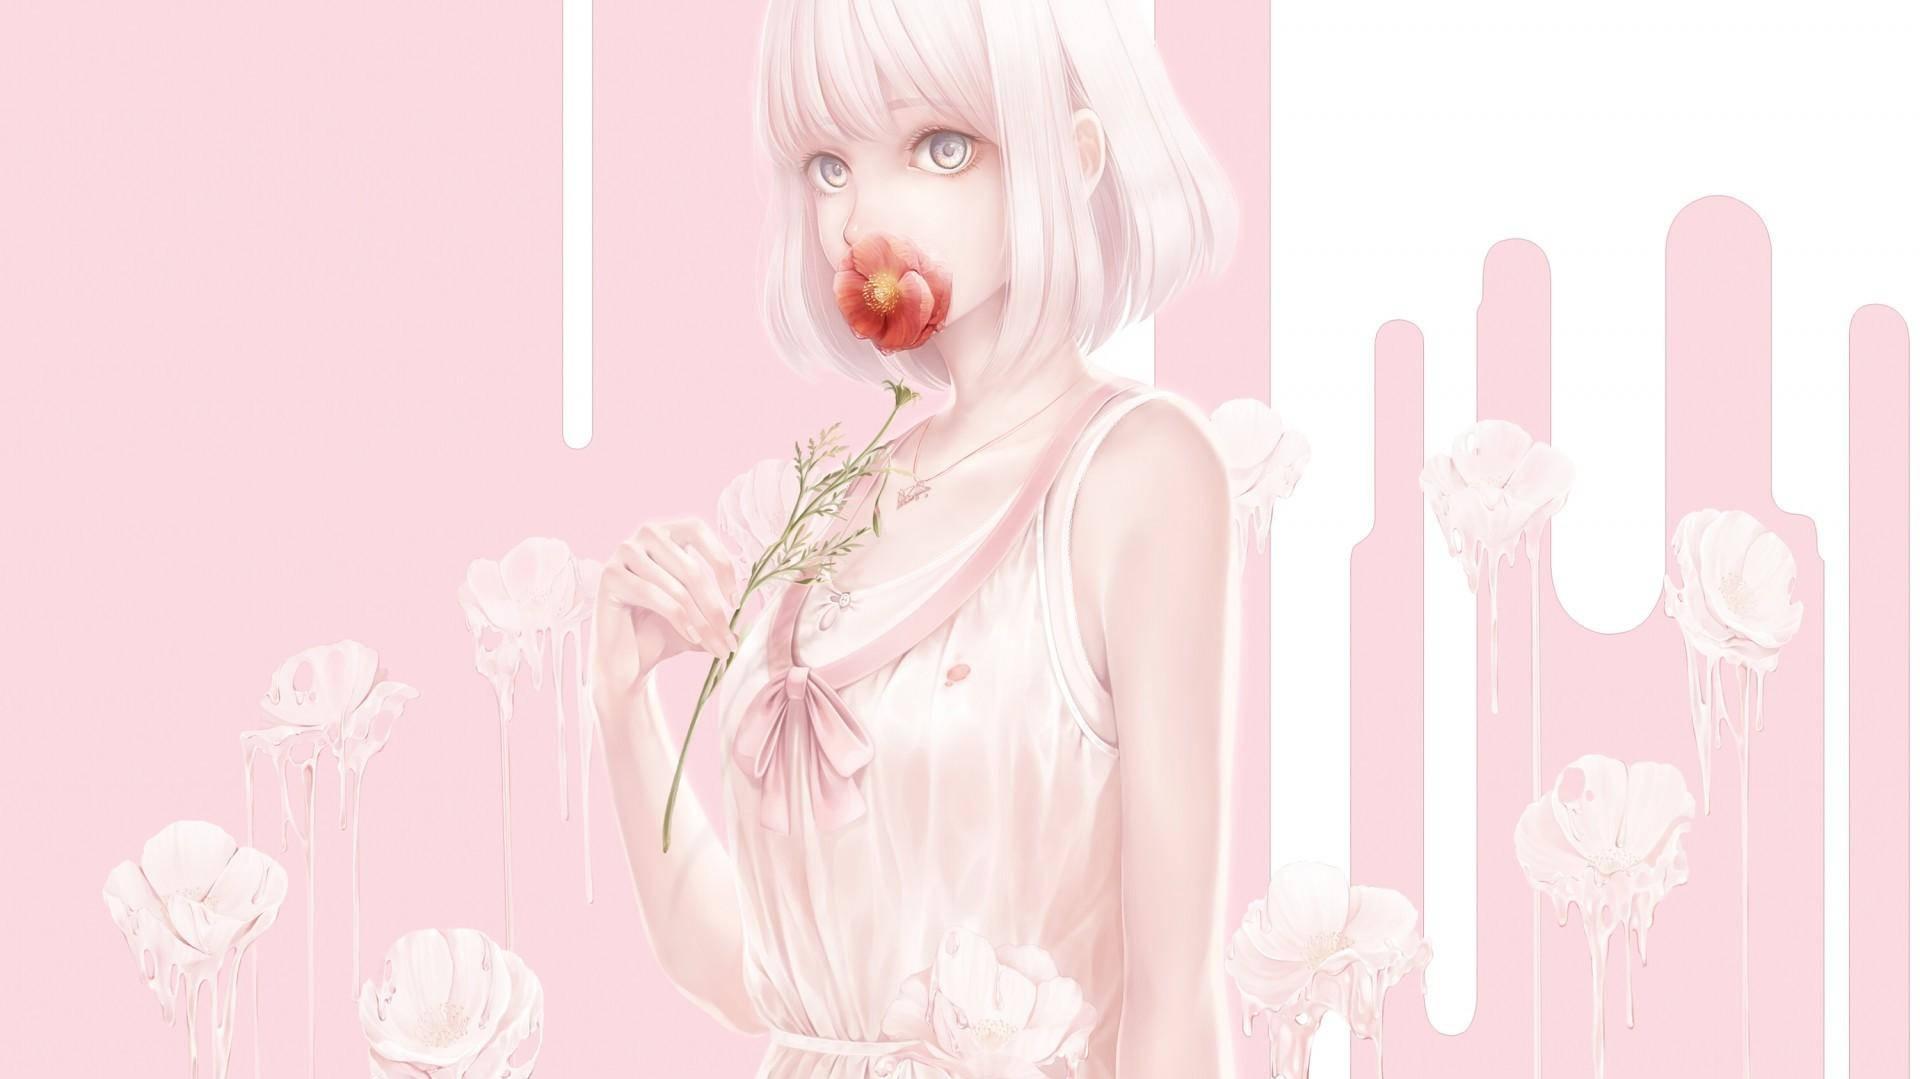 Anime Girl In Aesthetic Pink And Paste Gore Theme